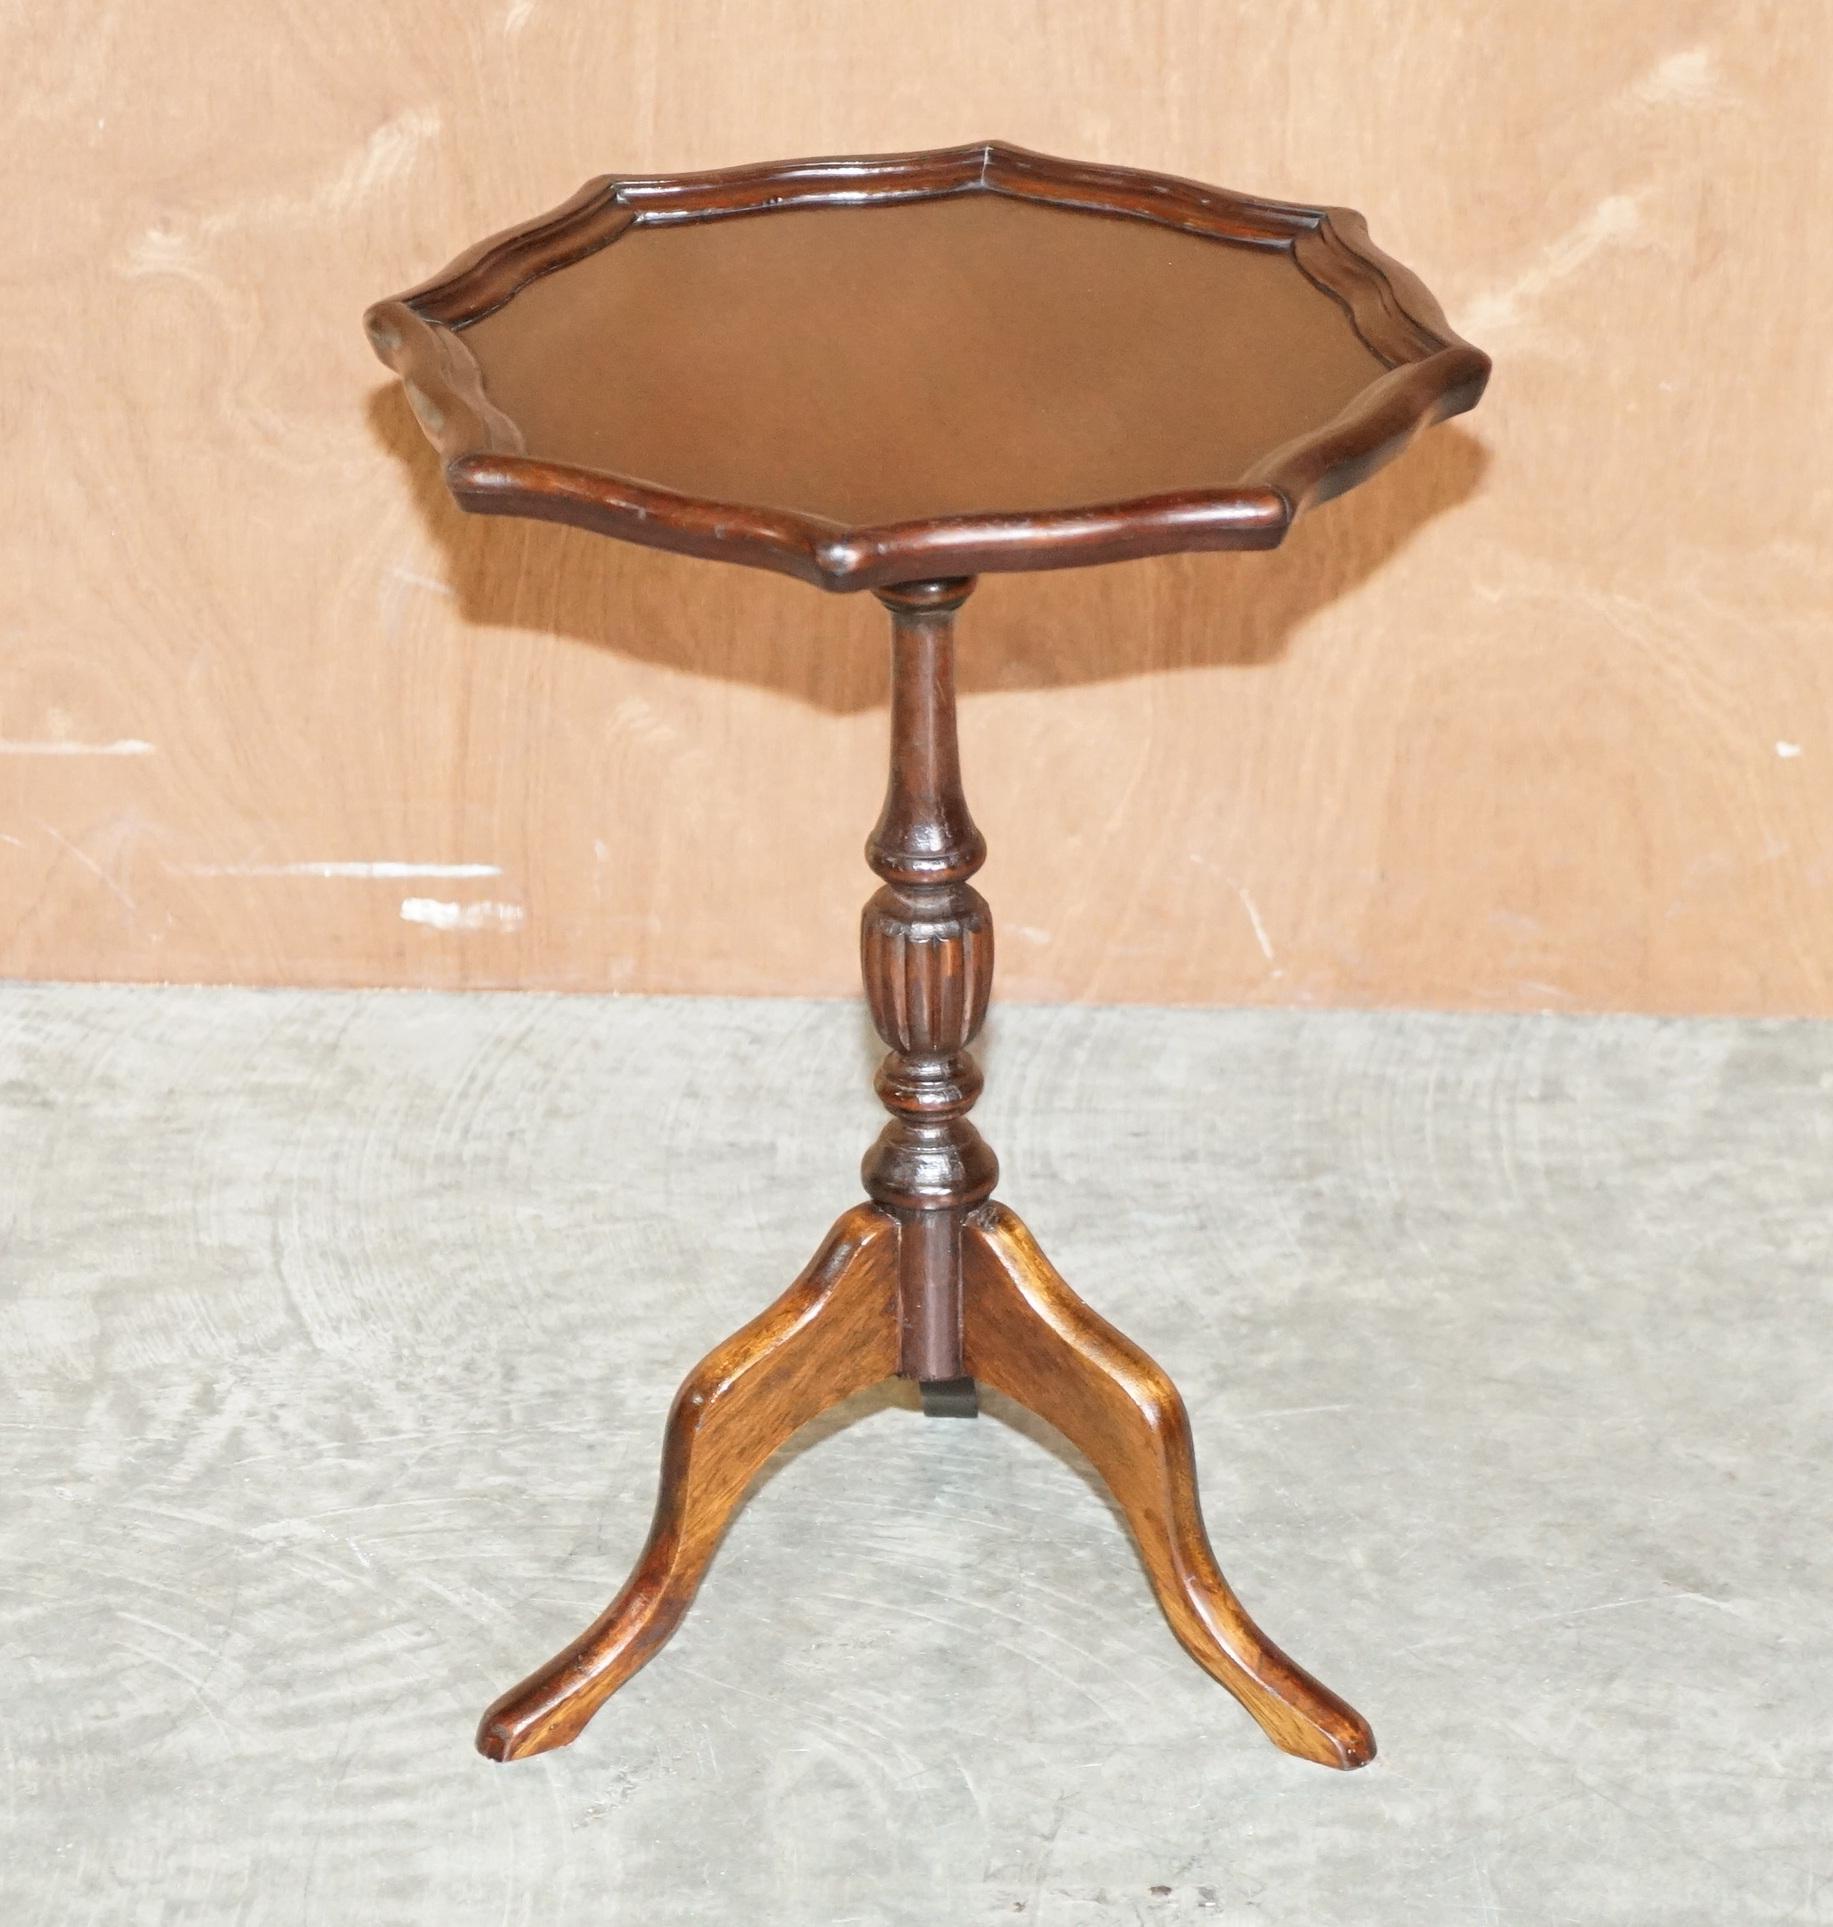 We are delighted to offer for sale this lovely vintage Mahogany Pie crust edge lamp or side table.

A good-looking well-made tripod table in good, we have cleaned waxed and polished it from top to bottom, there will be normal patina marks from